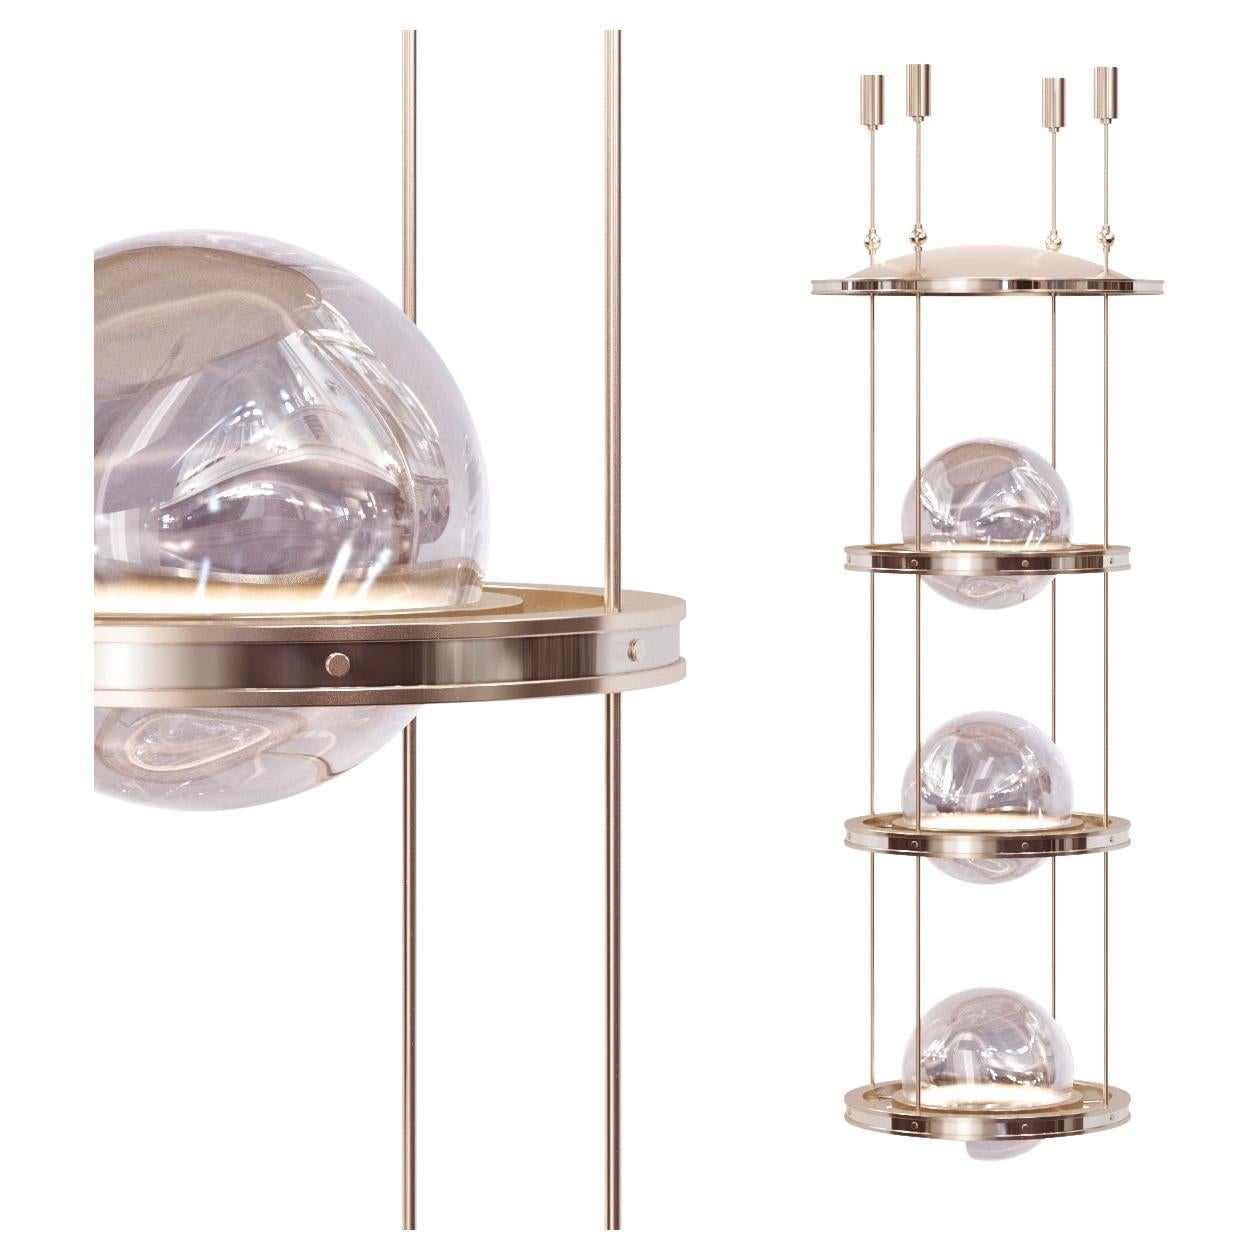 Meissa III Grand Polished Brass Chandelier with Art-Deco Vibes for High-Ceiling